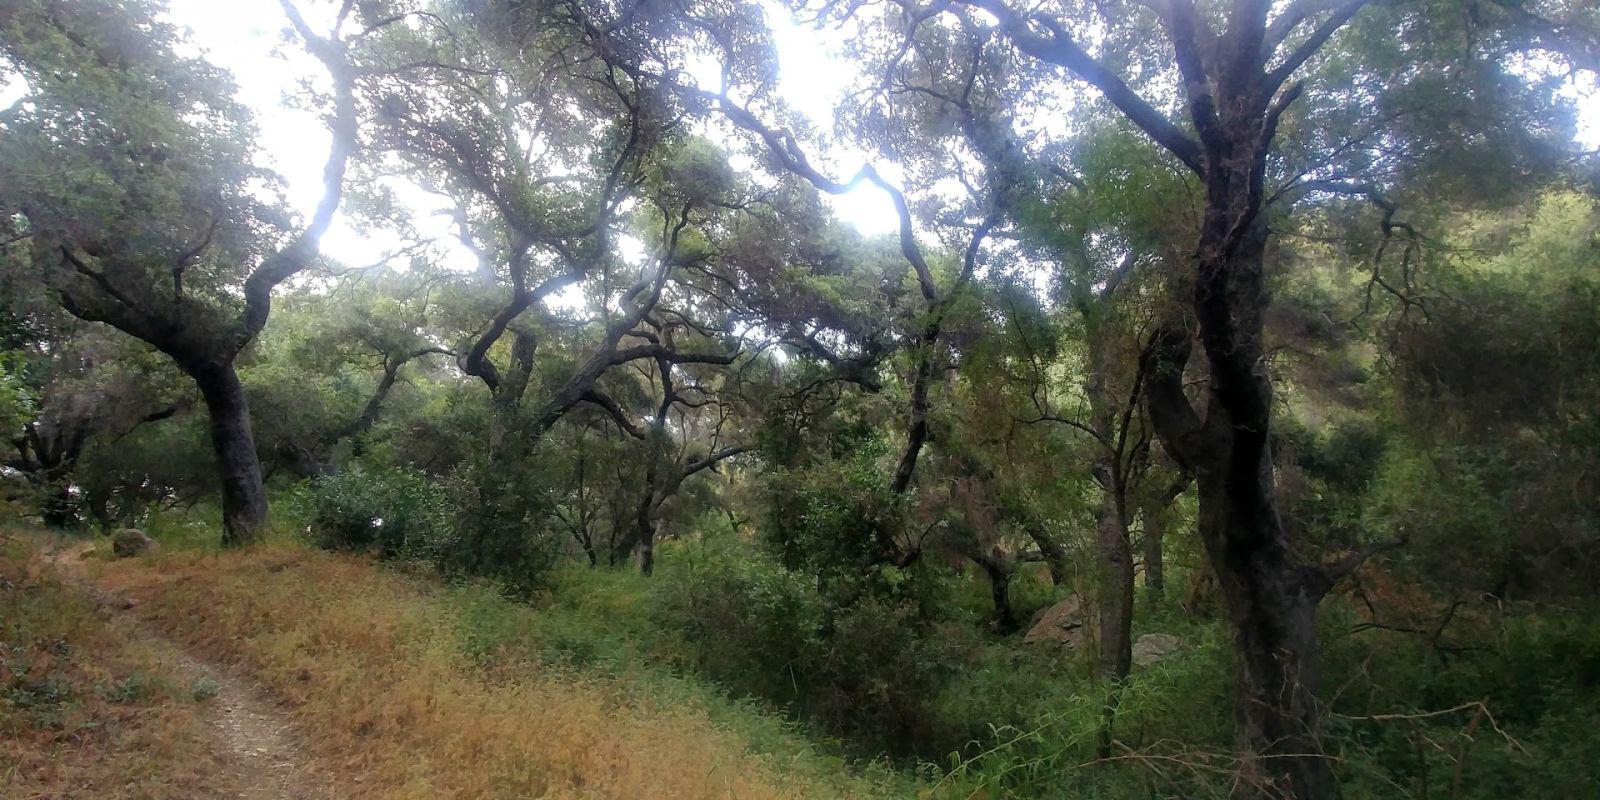 Many sections early on of dense, almost jungle-like areas. So abnormal for Socal hiking!